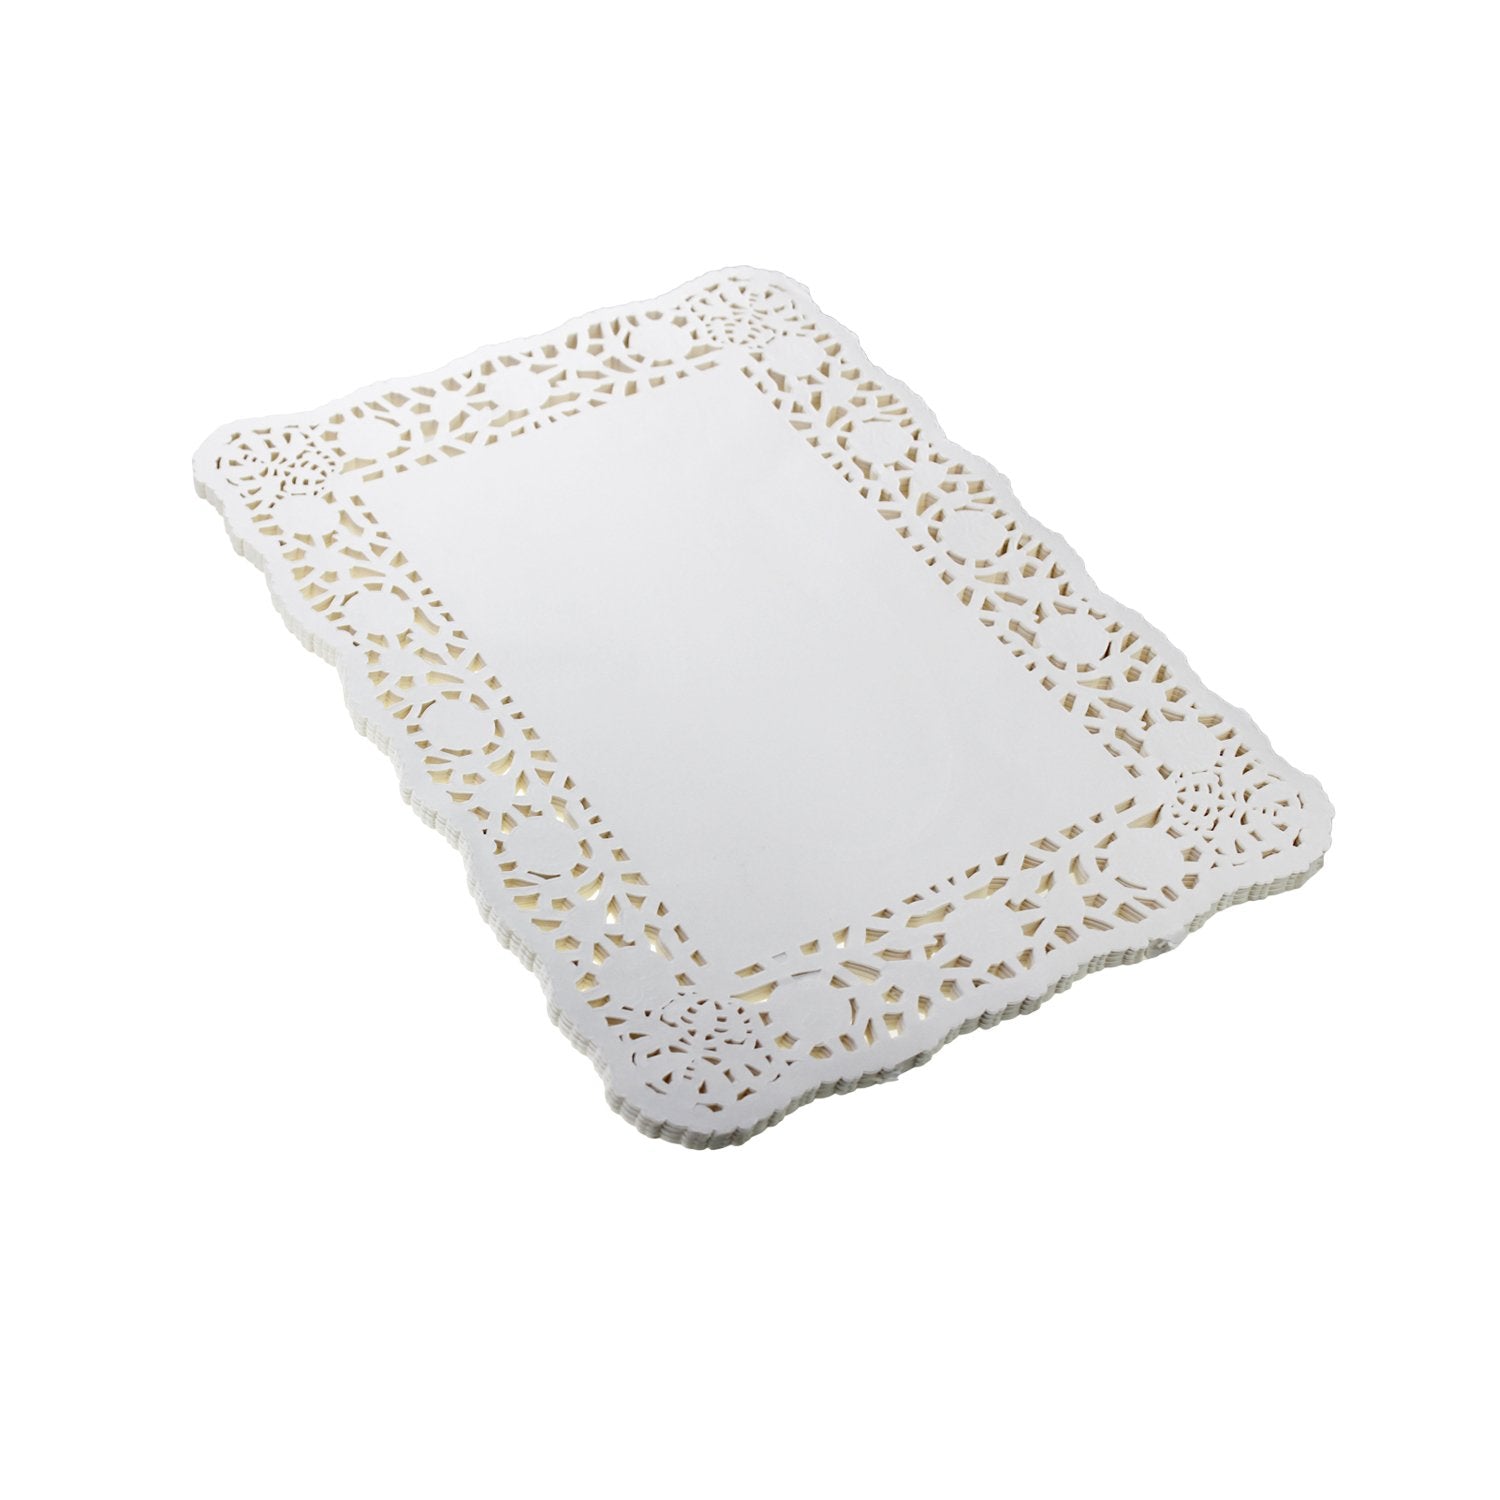 LJY 100 Pieces White Lace Rectangle Paper Doilies Cake Packaging Pads Wedding Tableware Decoration (10.5 x 14.5 inch)